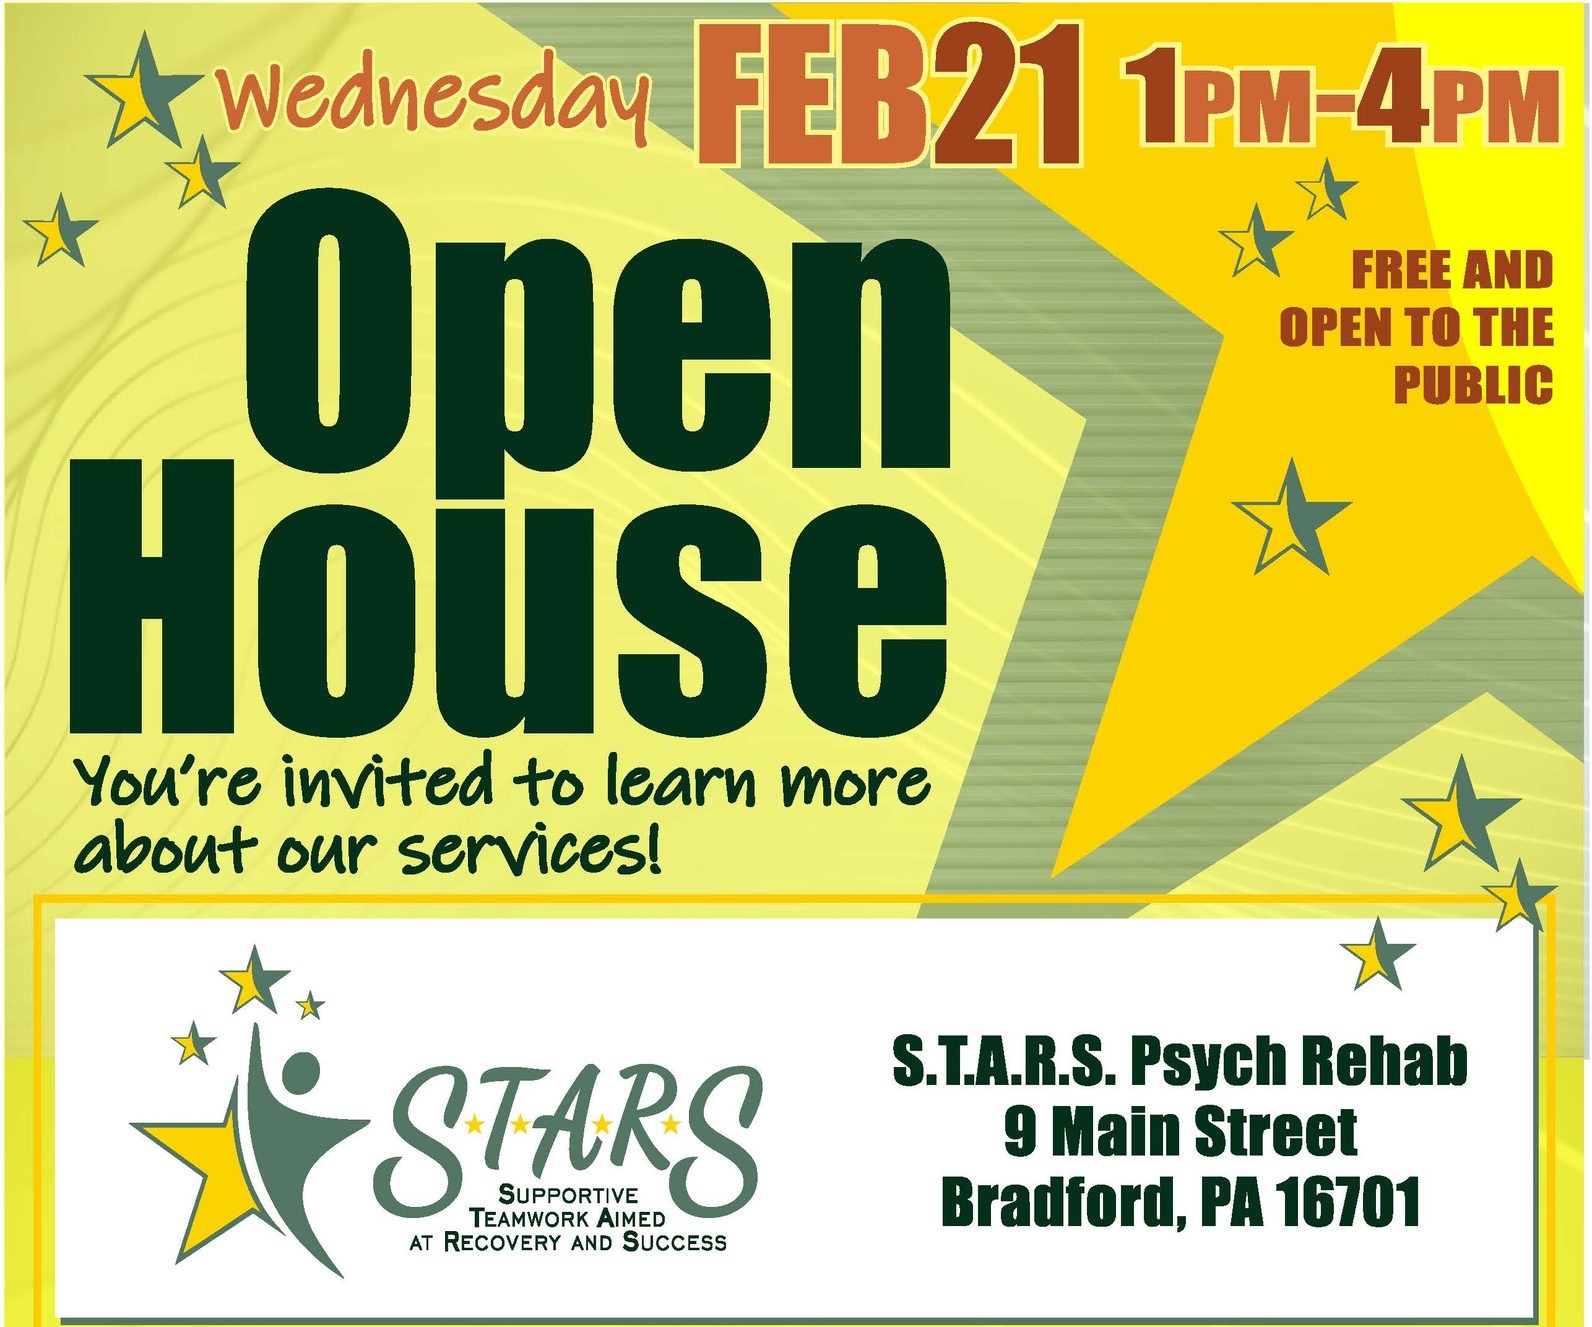 S.T.A.R.S. Psych Rehab to Hold Public Open House Image